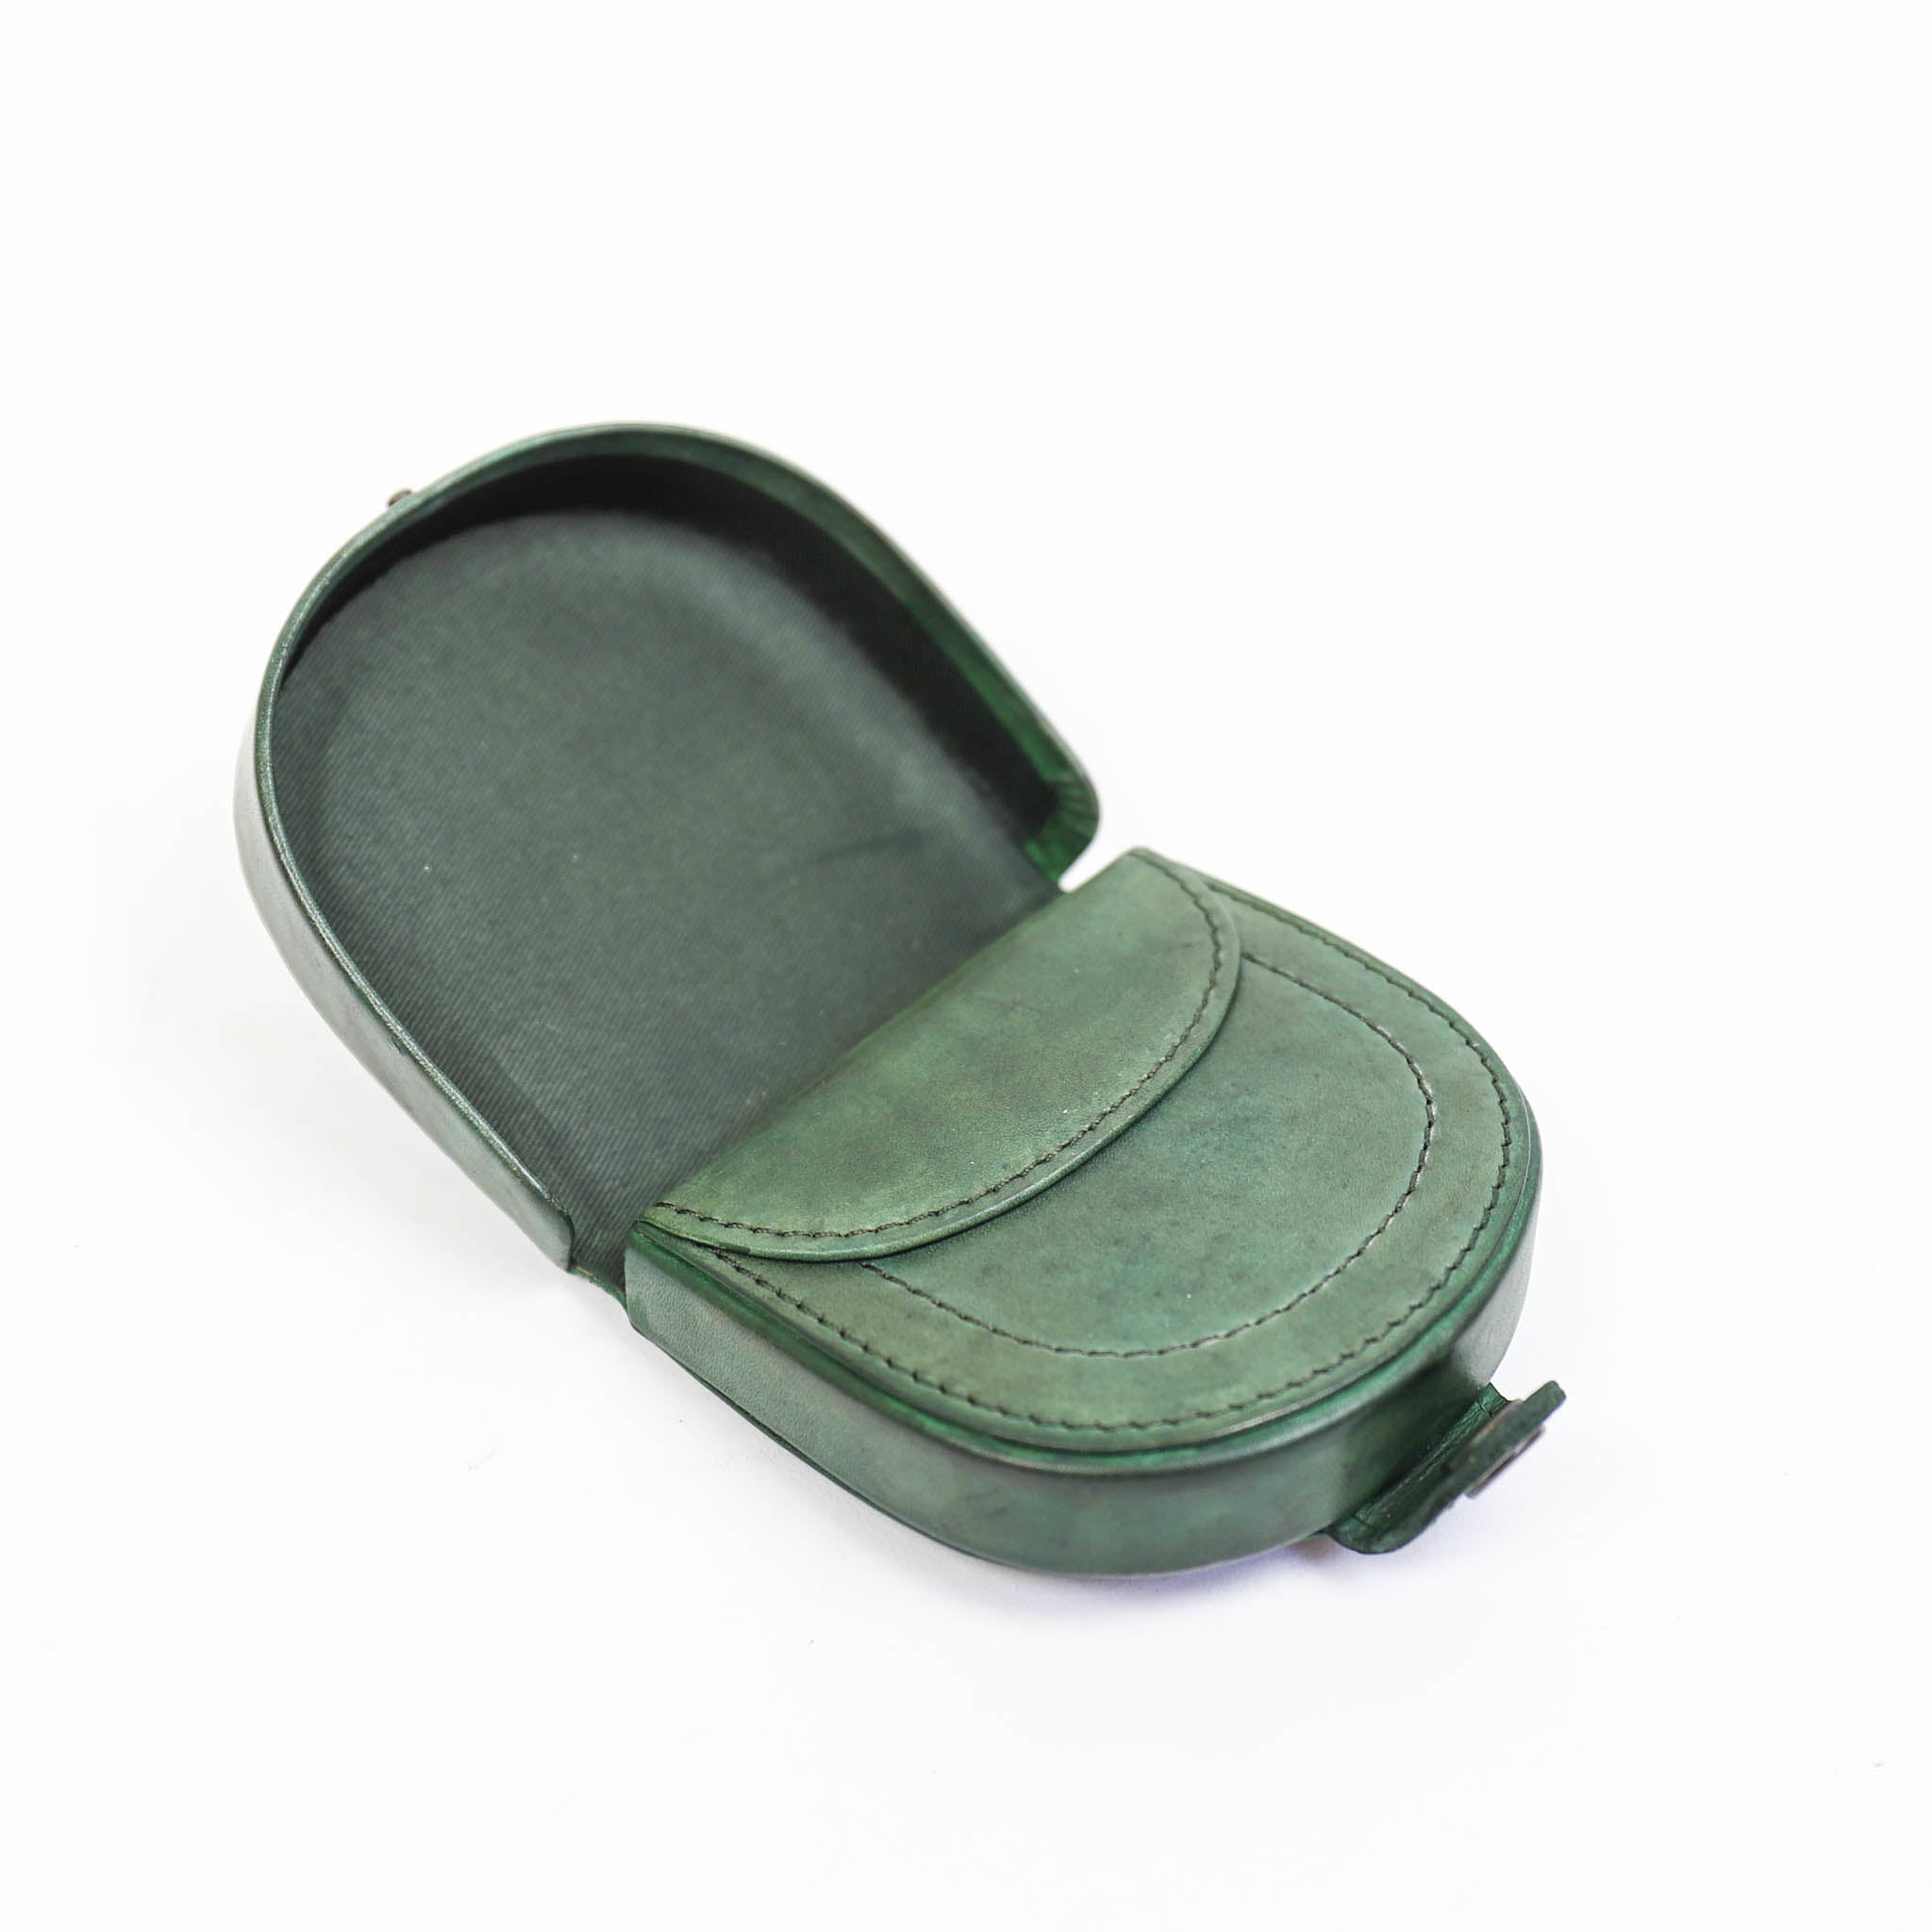 Wallet 'Mauro' green - CL 14925